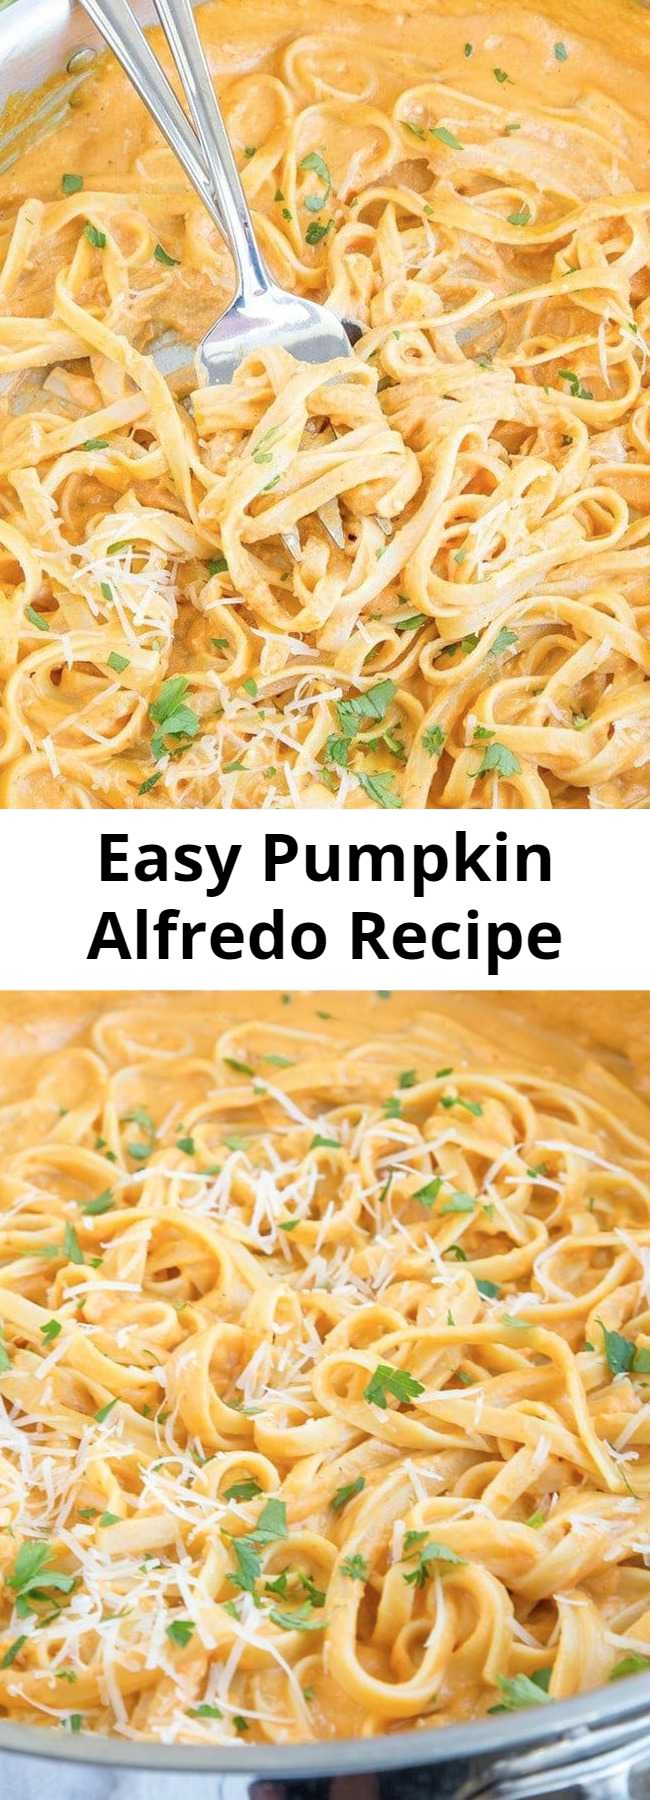 Easy Pumpkin Alfredo Recipe - This Pumpkin Alfredo is creamy, rich and delicious, and without all the calories and fat of a regular Alfredo sauce. A perfect fall dinner that's easy enough for a weeknight meal and you'll never miss the cream! - pumpkin recipes for the win!